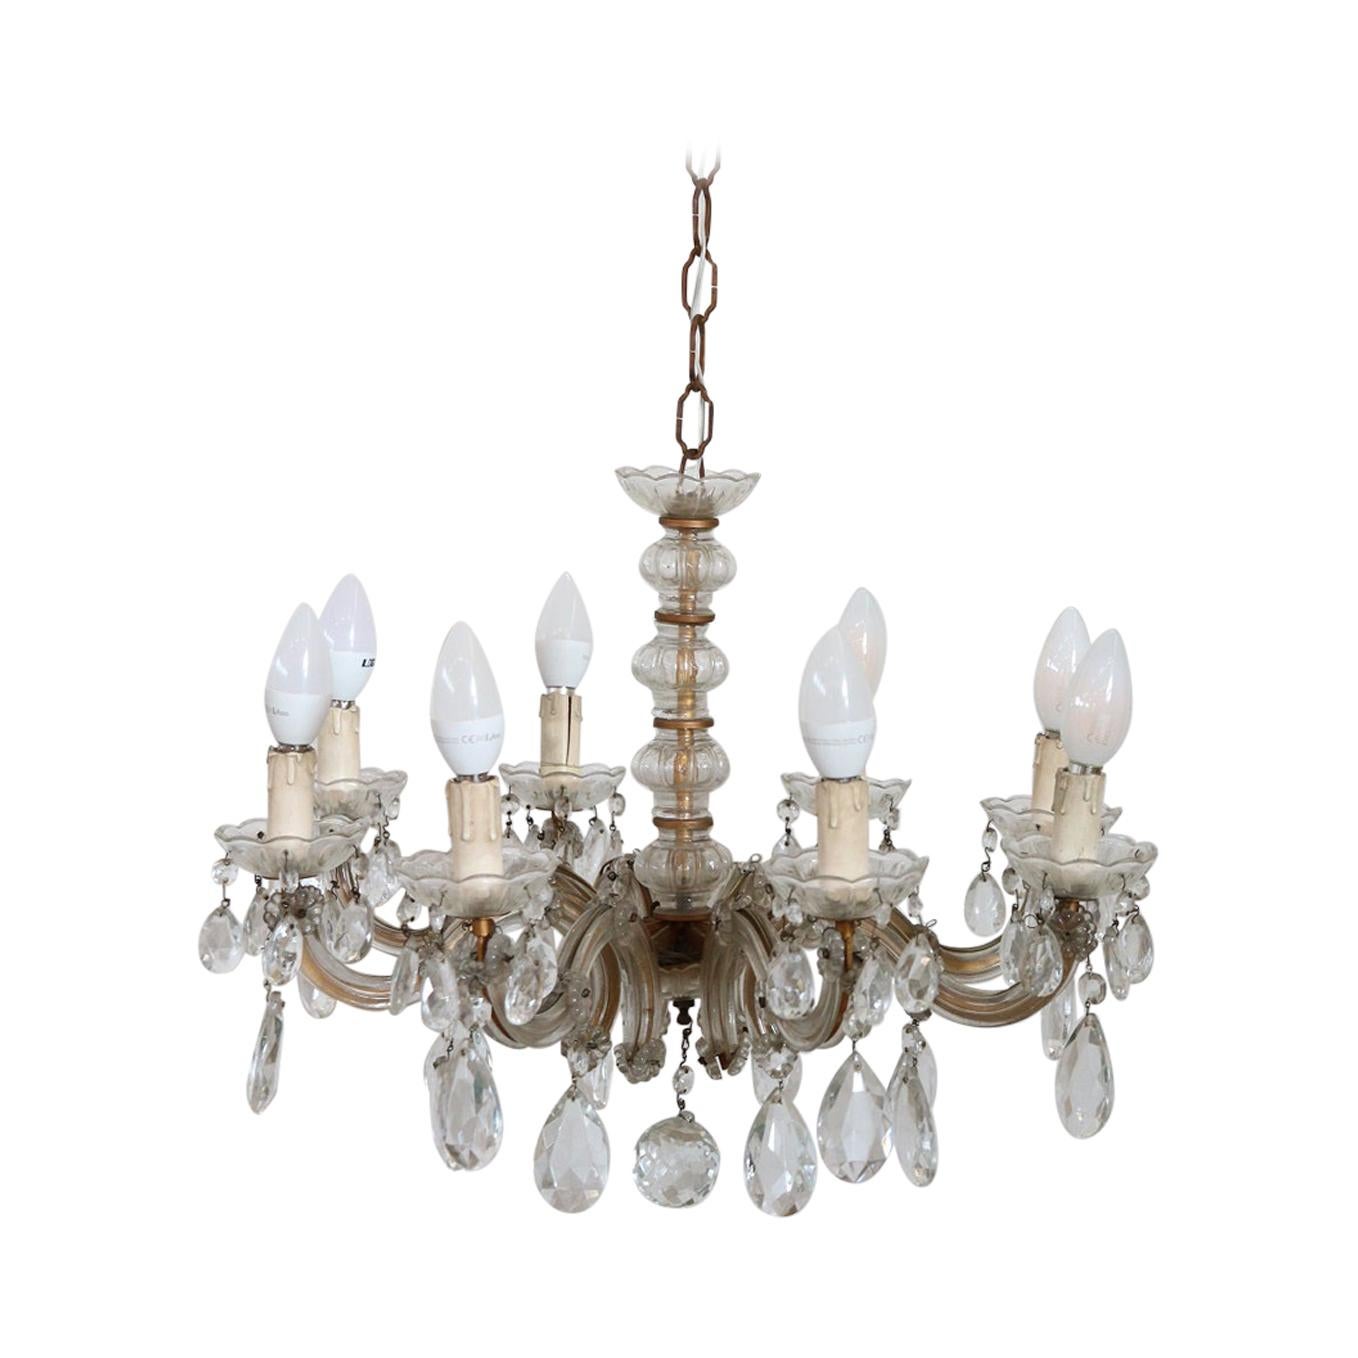 19th Century Italian Bronze and Crystals Chandelier For Sale